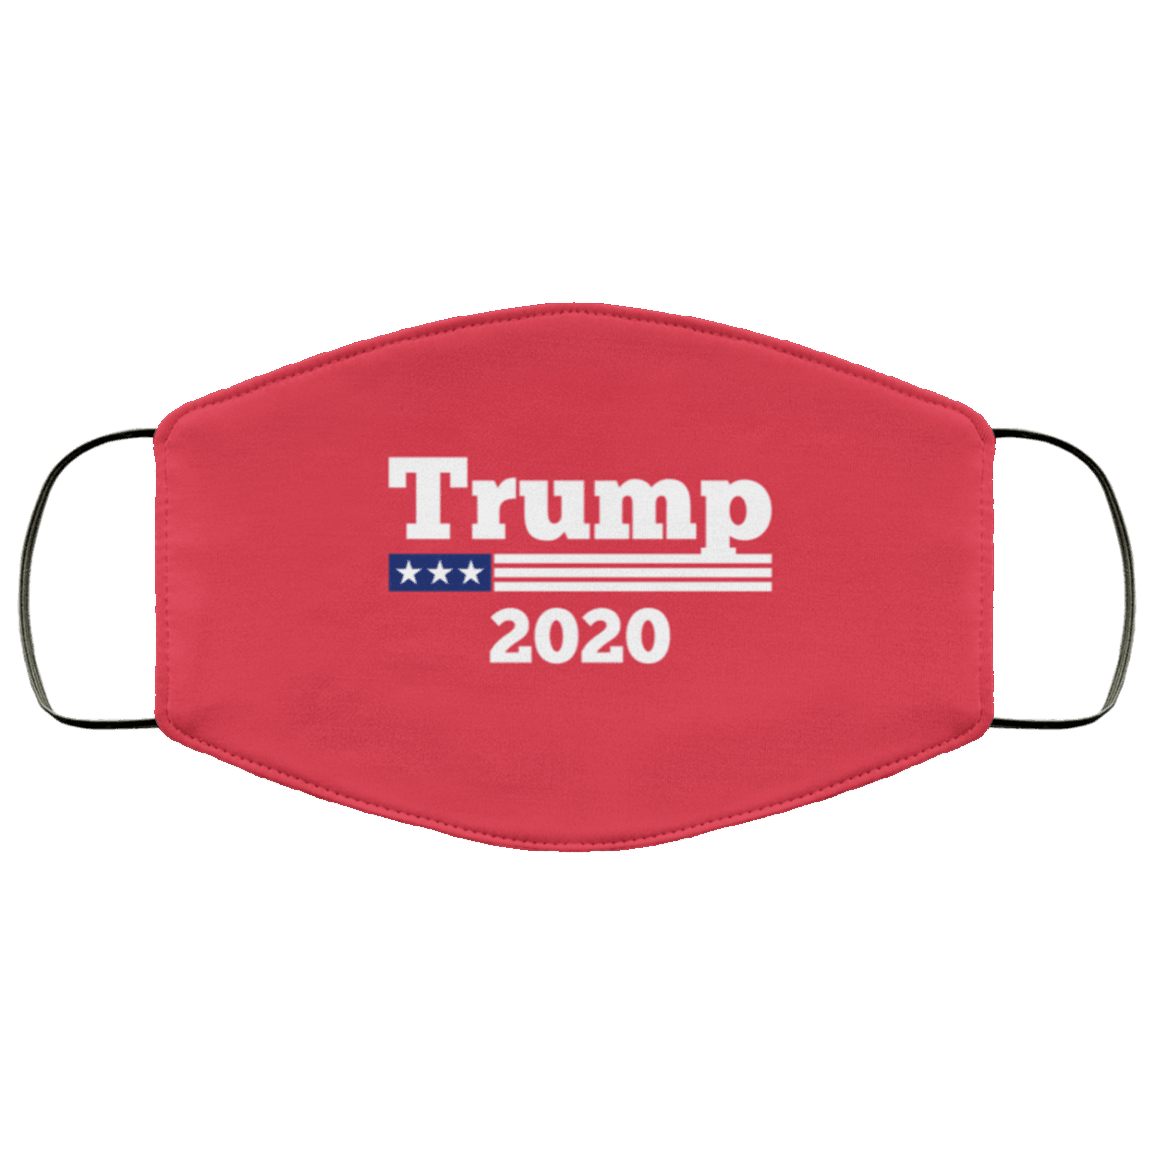 Designs by MyUtopia Shout Out:Trump 2020 Adult Fabric Face Mask with Elastic Ear Loops,3 Layer Fabric Face Mask / Red / Adult,Fabric Face Mask